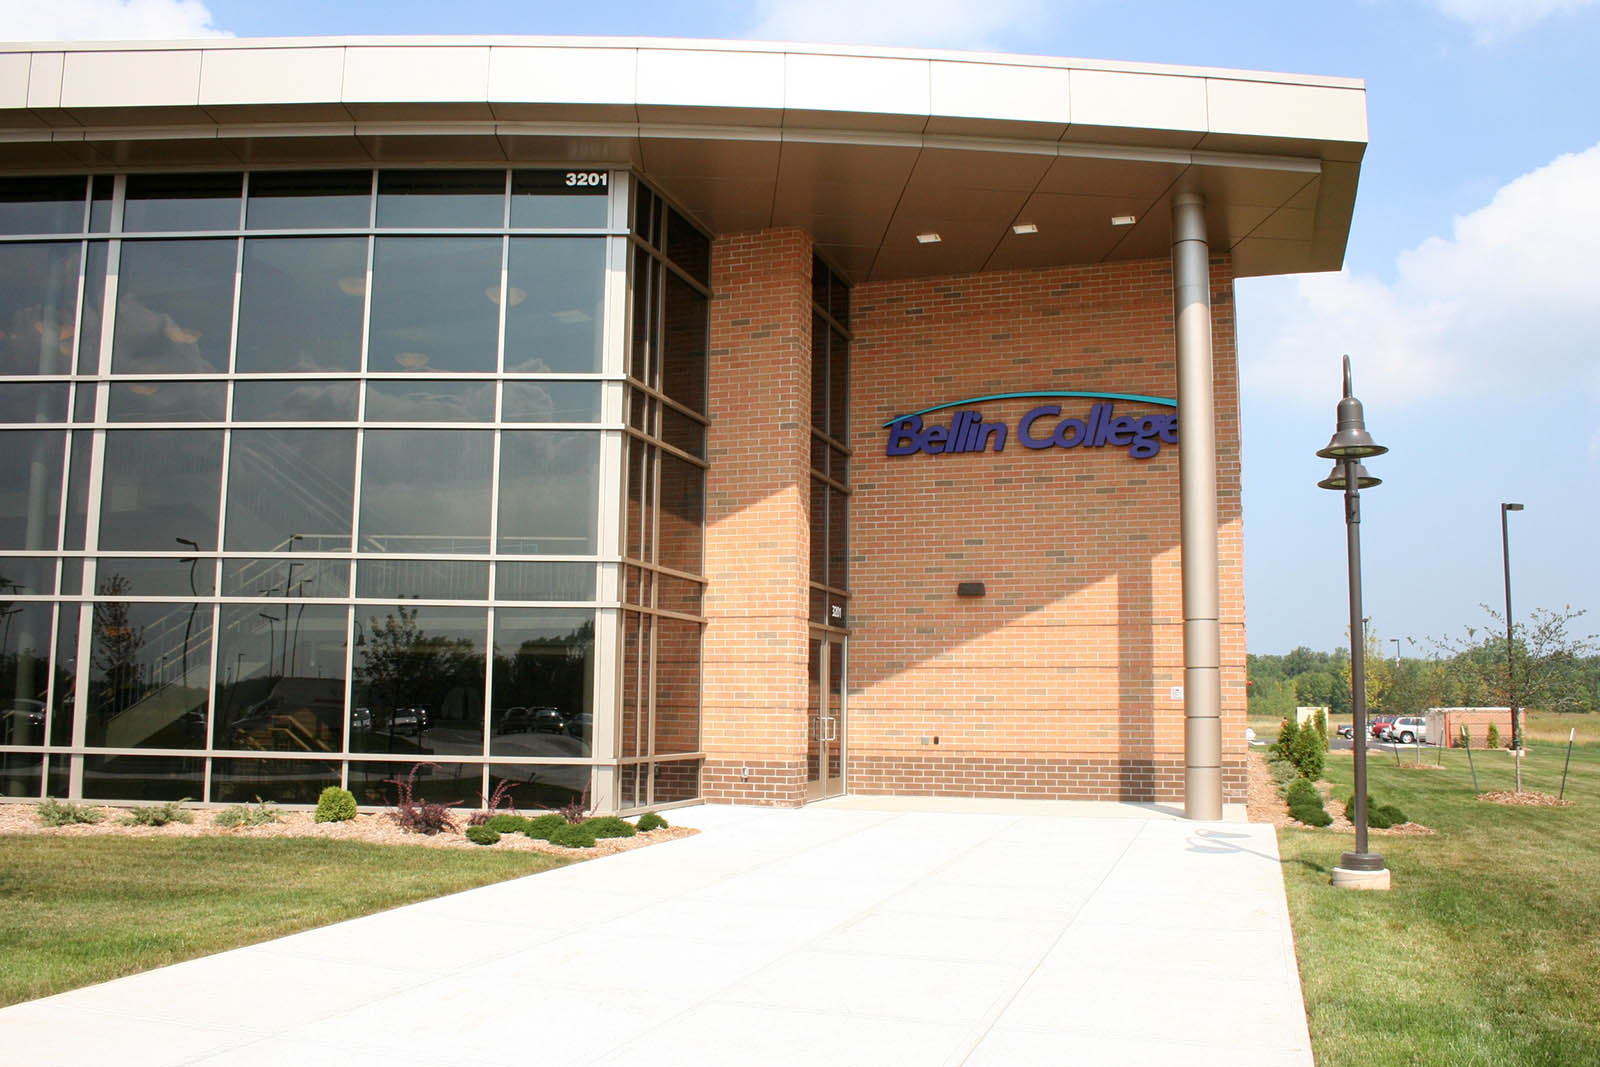 Exterior and main entrance of Bellin College